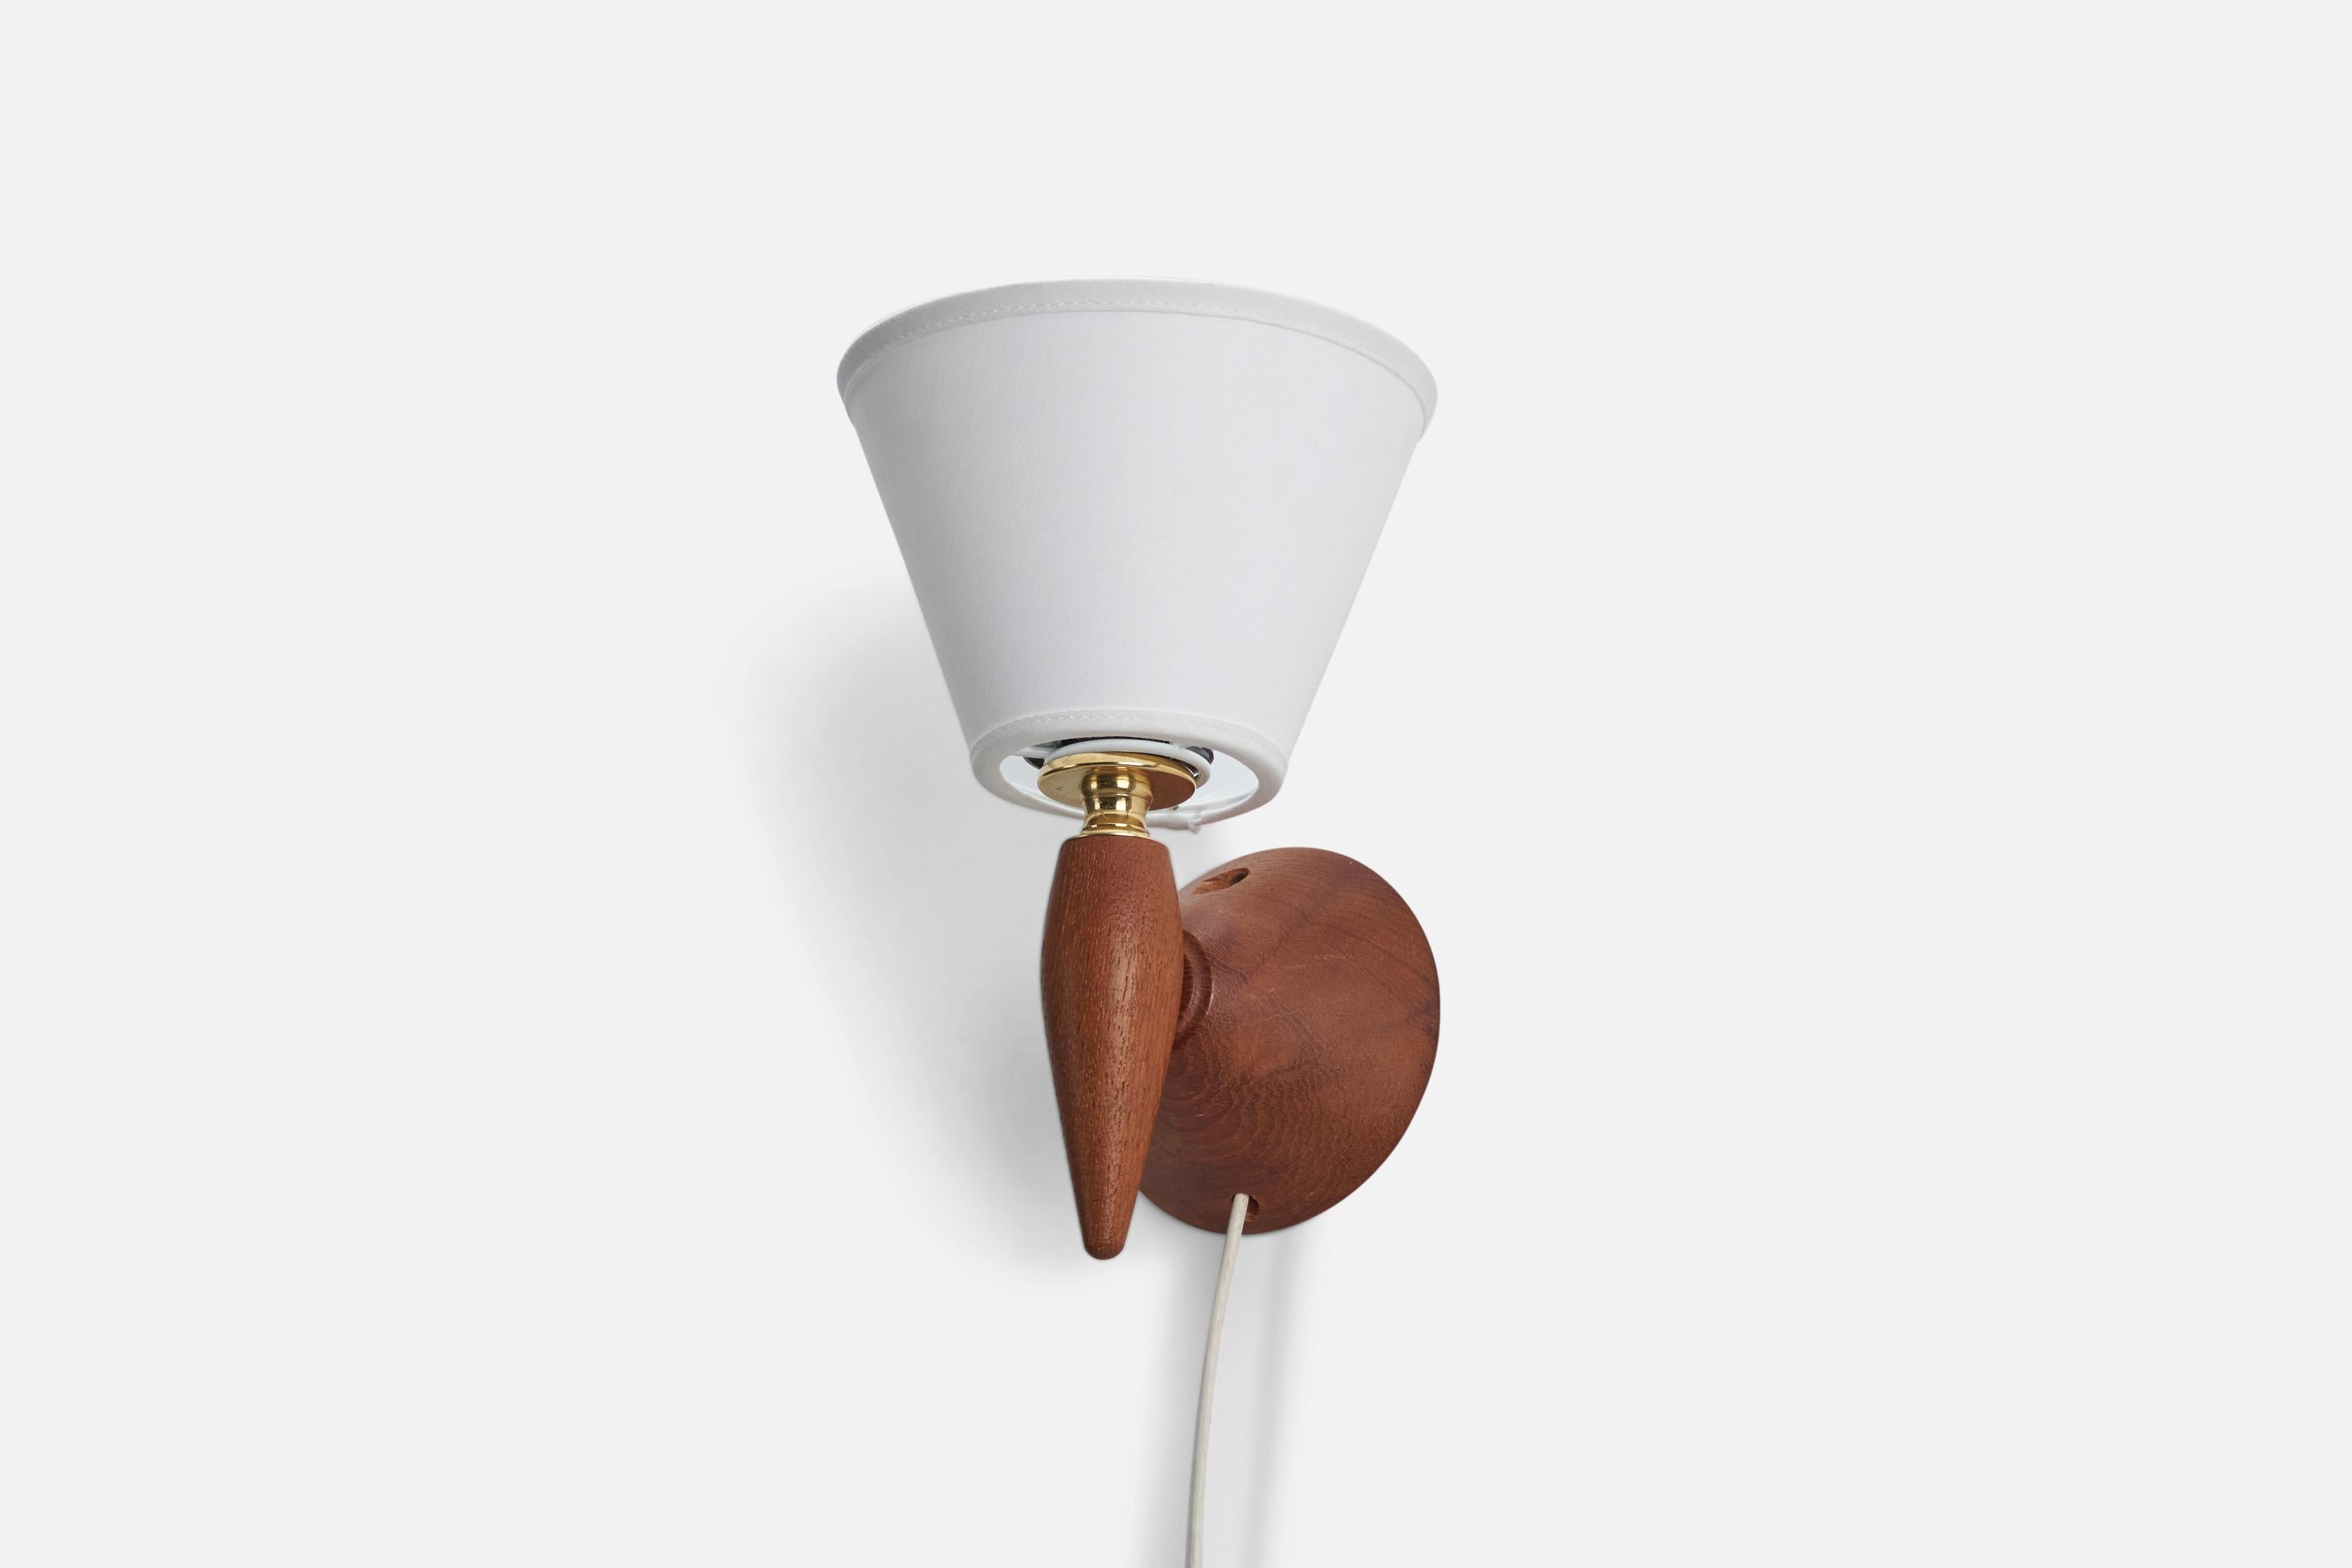 A teak, brass and fabric wall light / sconce designed and produced by a Swedish designer, Sweden, 1950s.

Dimensions stated are of Sconce with Lampshade.

Dimensions of Back Plate (inches) : 3.75 x 3.75 x 1.08 (height x width x depth).

Socket